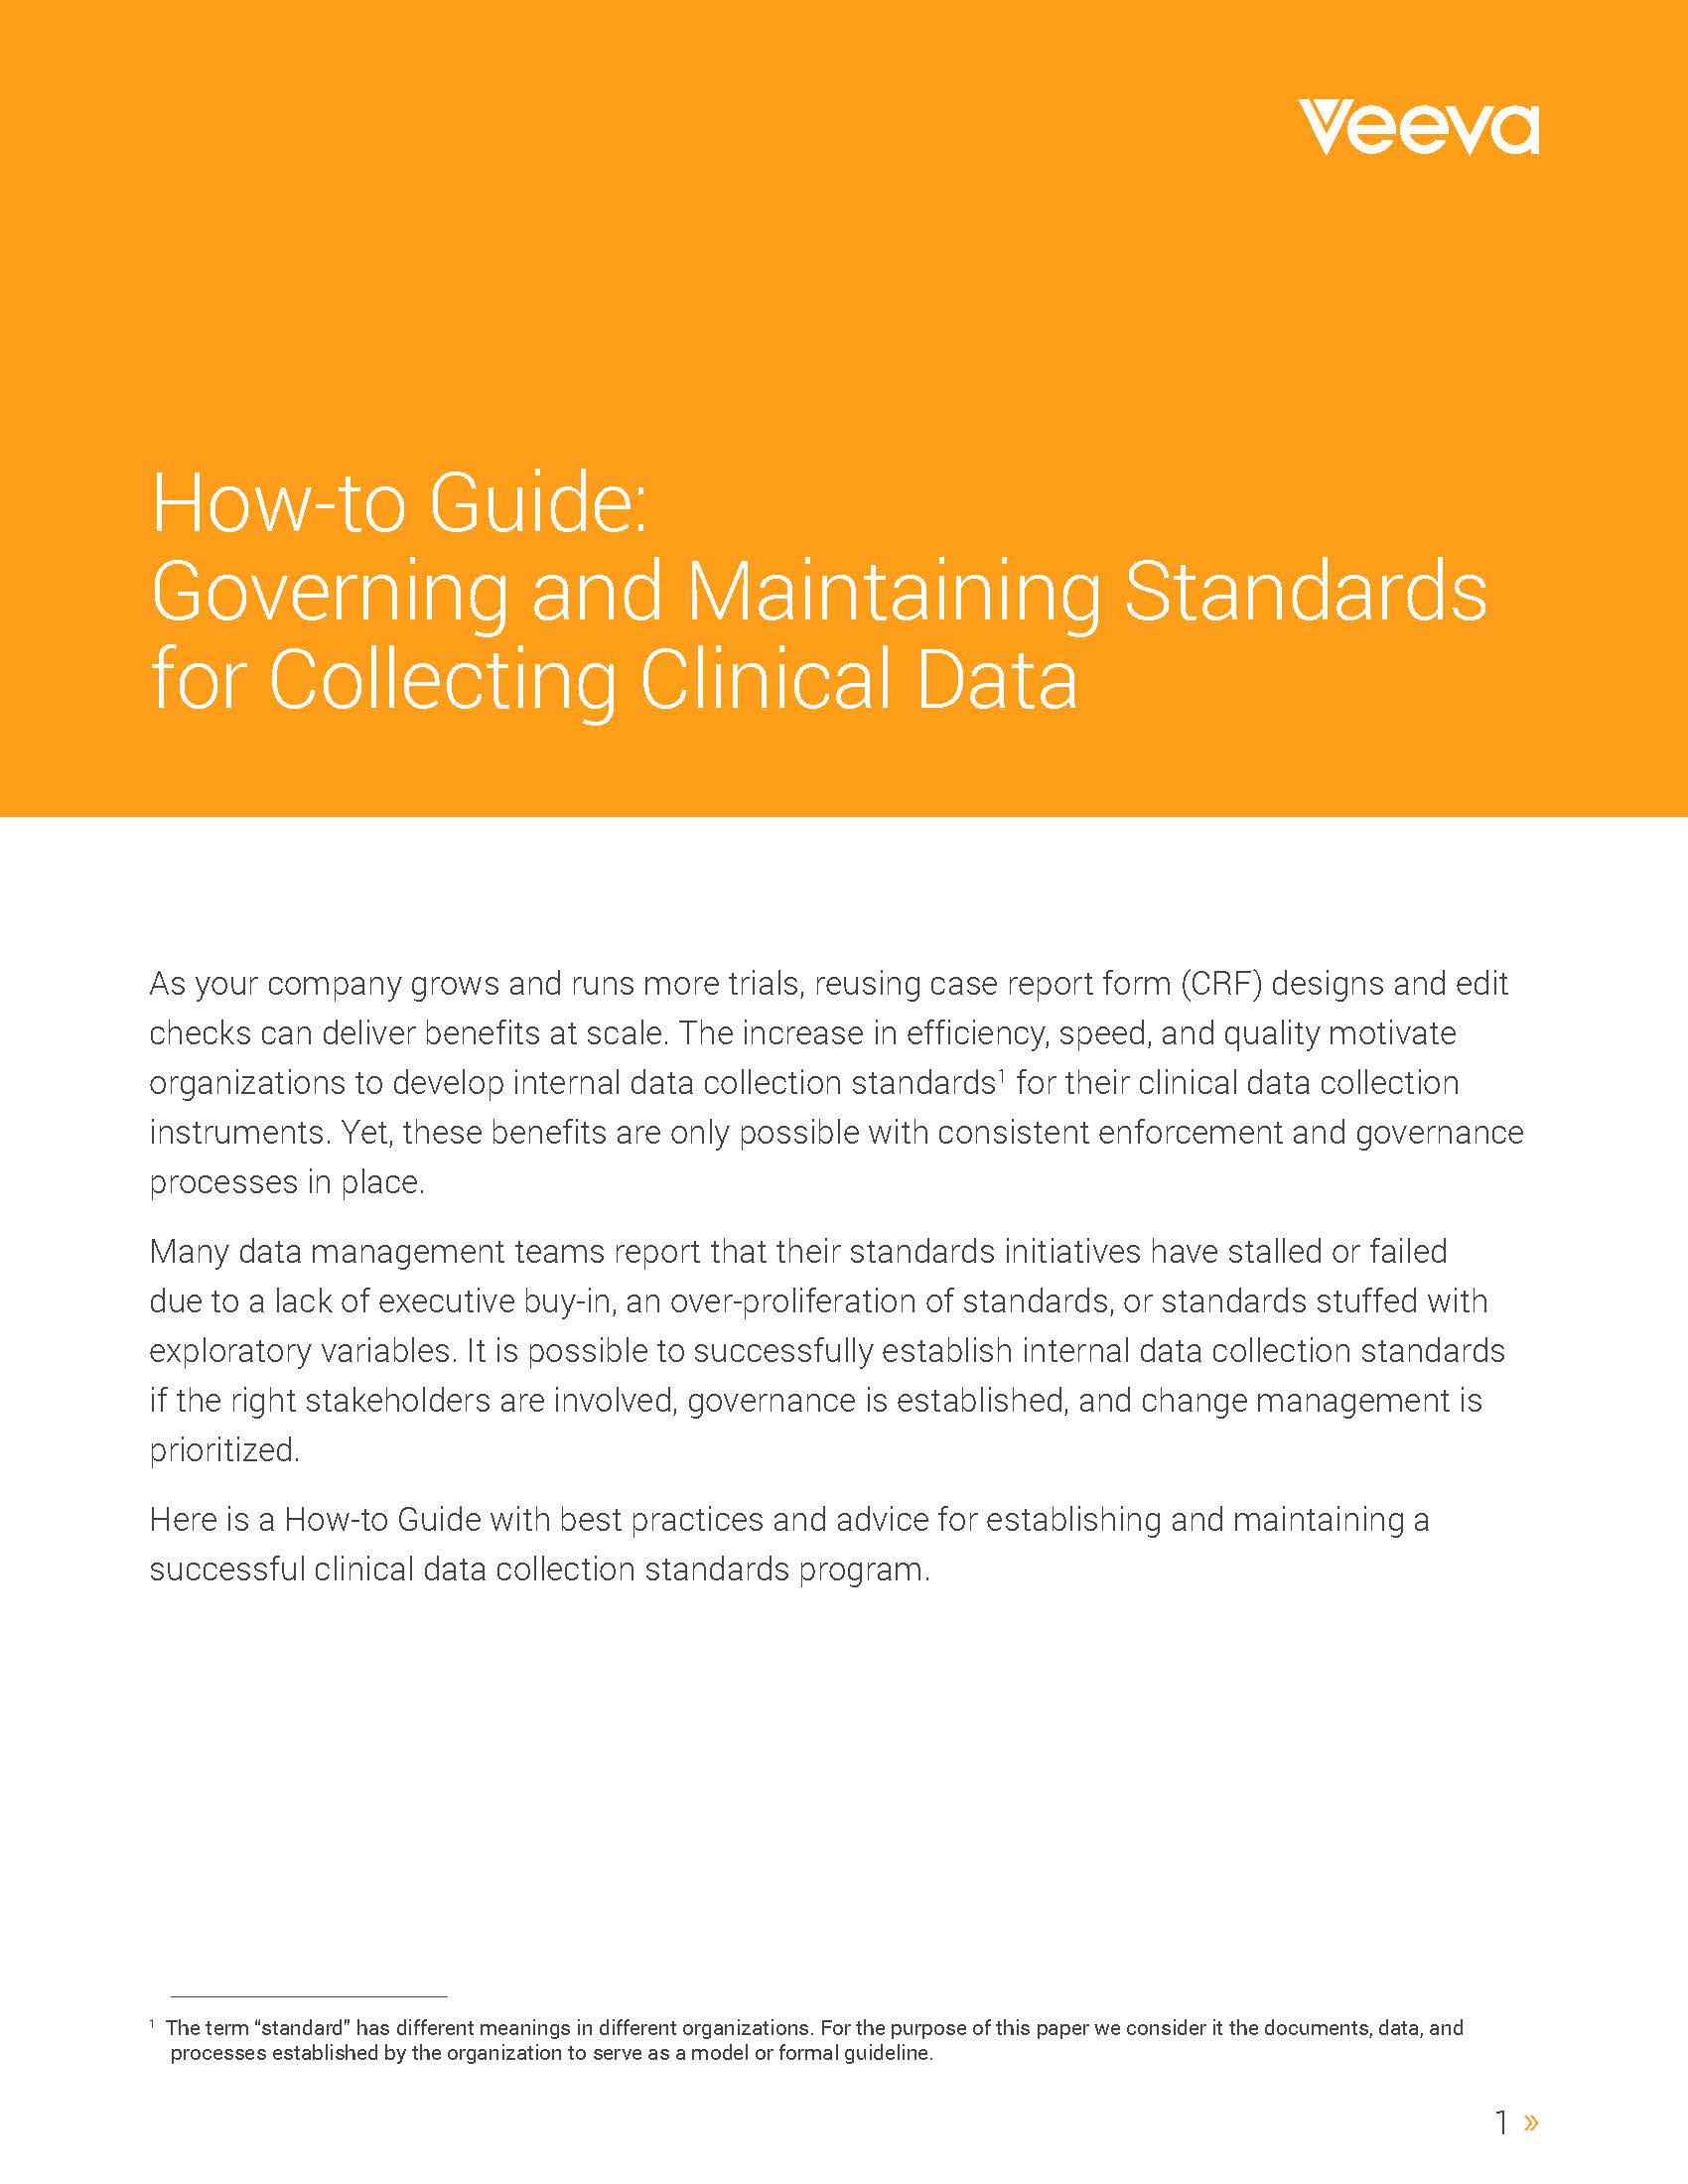 How-to Guide: Governing and Maintaining Standards for Collecting Clinical Data